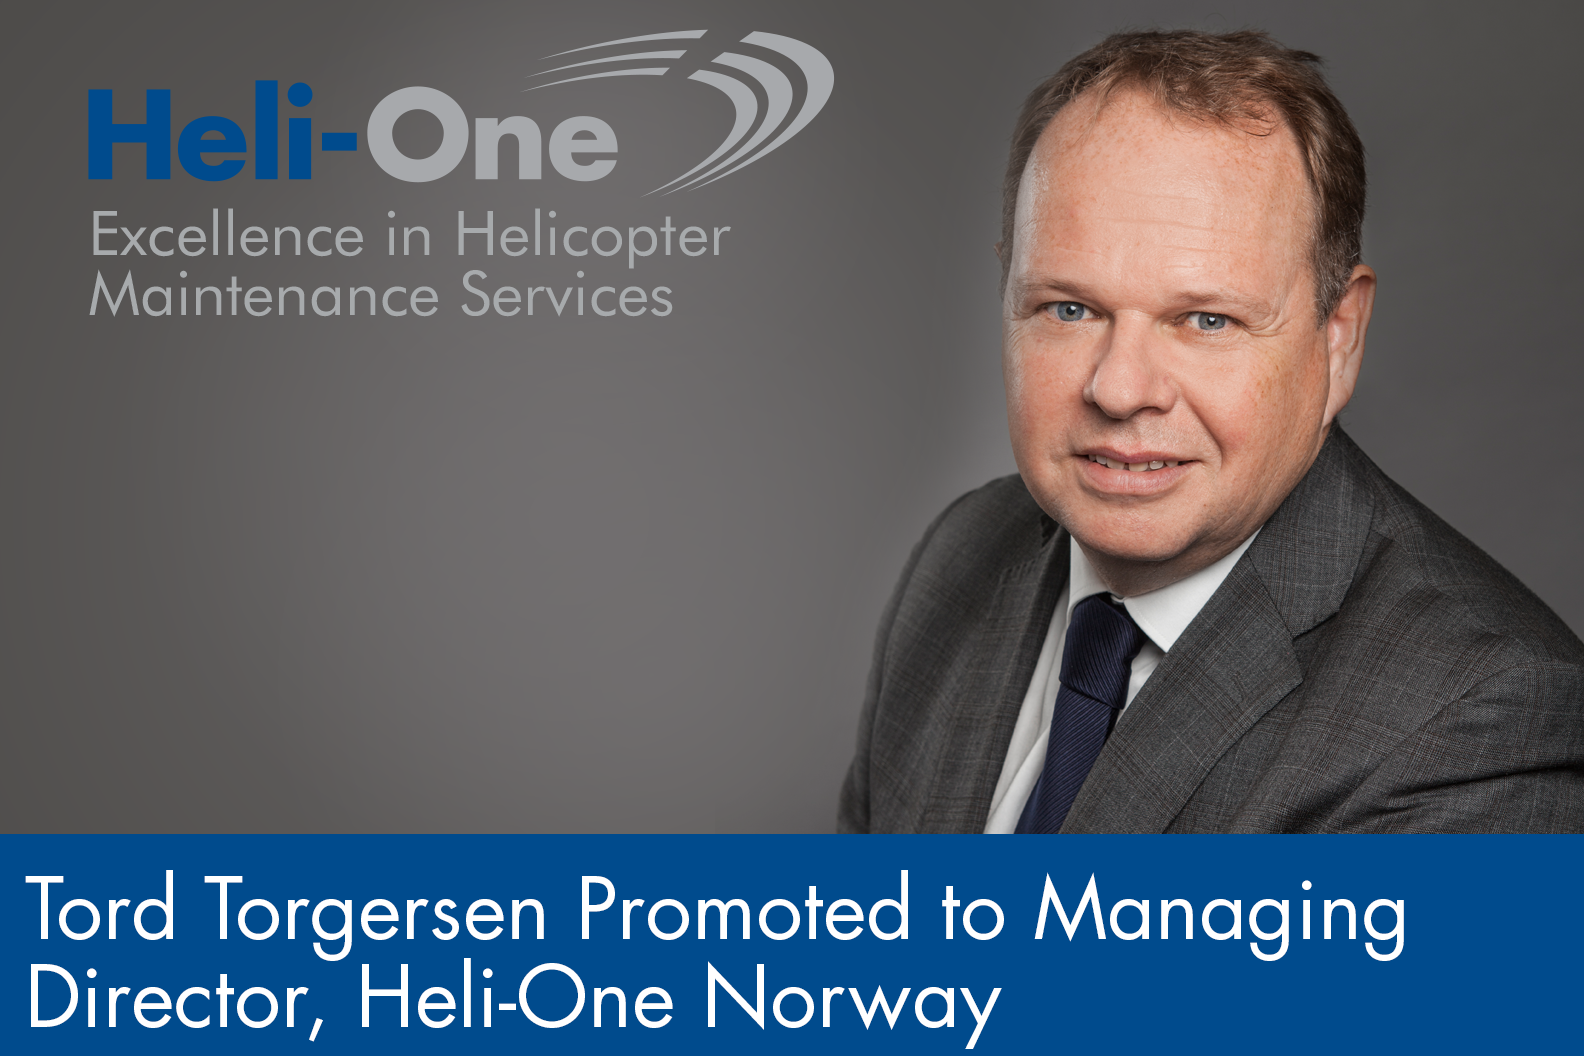 Oct-2-2017_Tord-Torgersen-Promoted-to-Managing-Director-H1-Norway